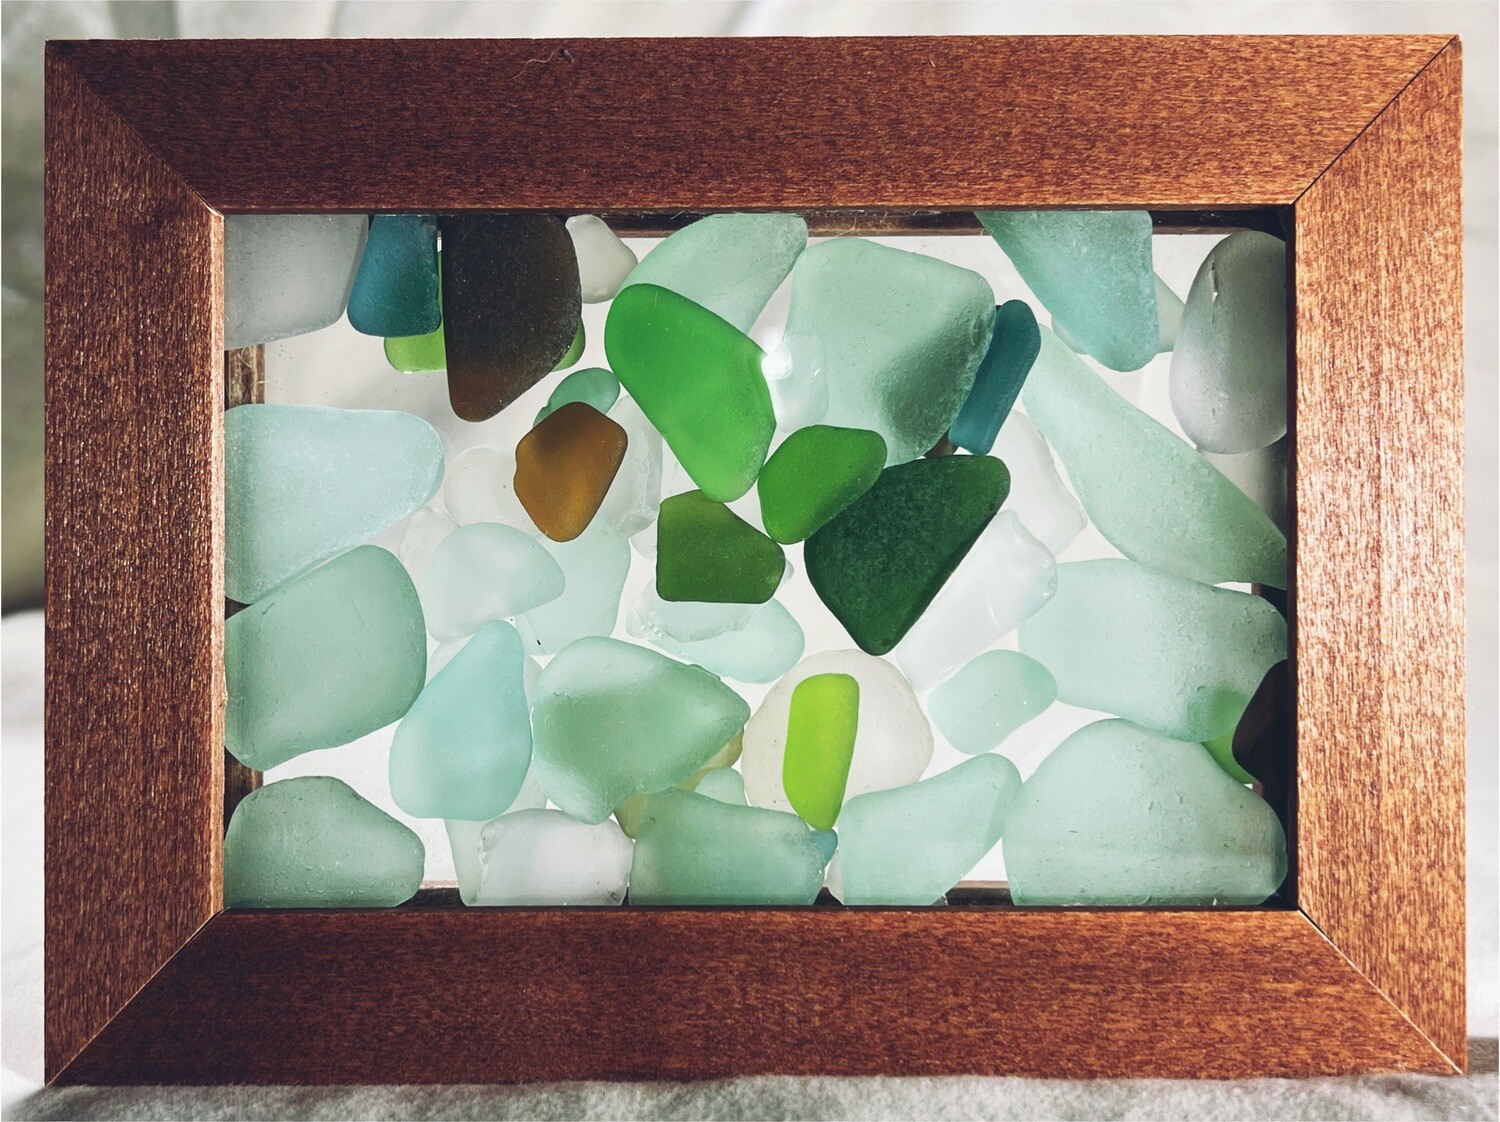 A Single Tile / Sea Glass Frame Art / 8x10 Shadow Box Matted to 5x7 /  Seaglass Only / Handcrafted / Maine Made 